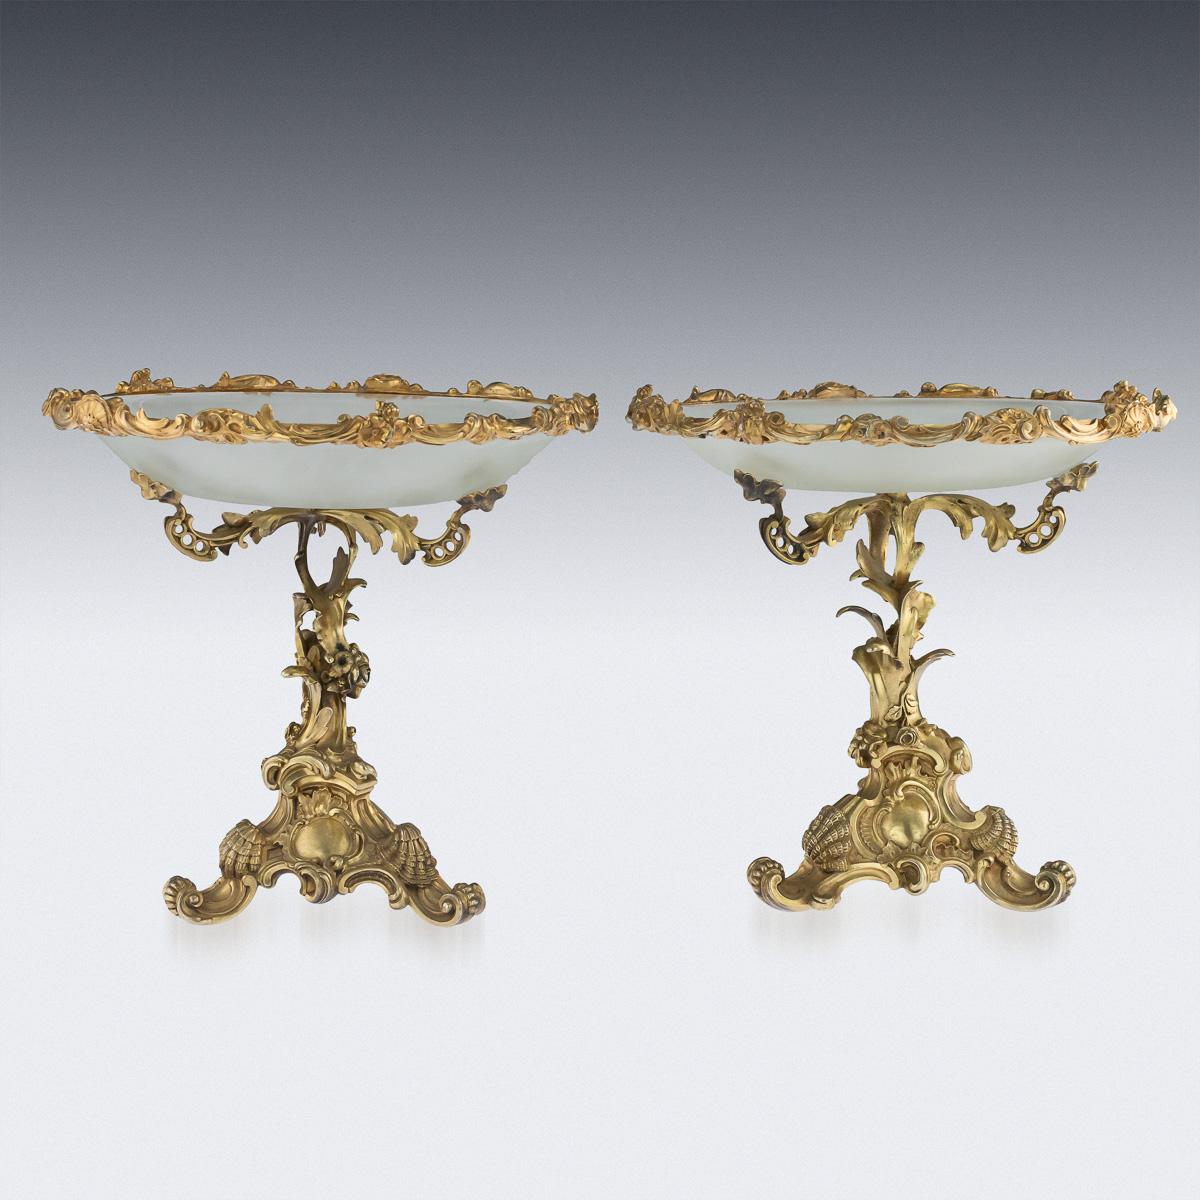 Antique 19th century imperial Russian solid silver gilt pair of tazza, of very elaborate design, cast with scrolls, shells and flowers in a French Rococo taste, mounted with a frosted glass dishes. Hallmarked Russian silver 84 (875 standard),